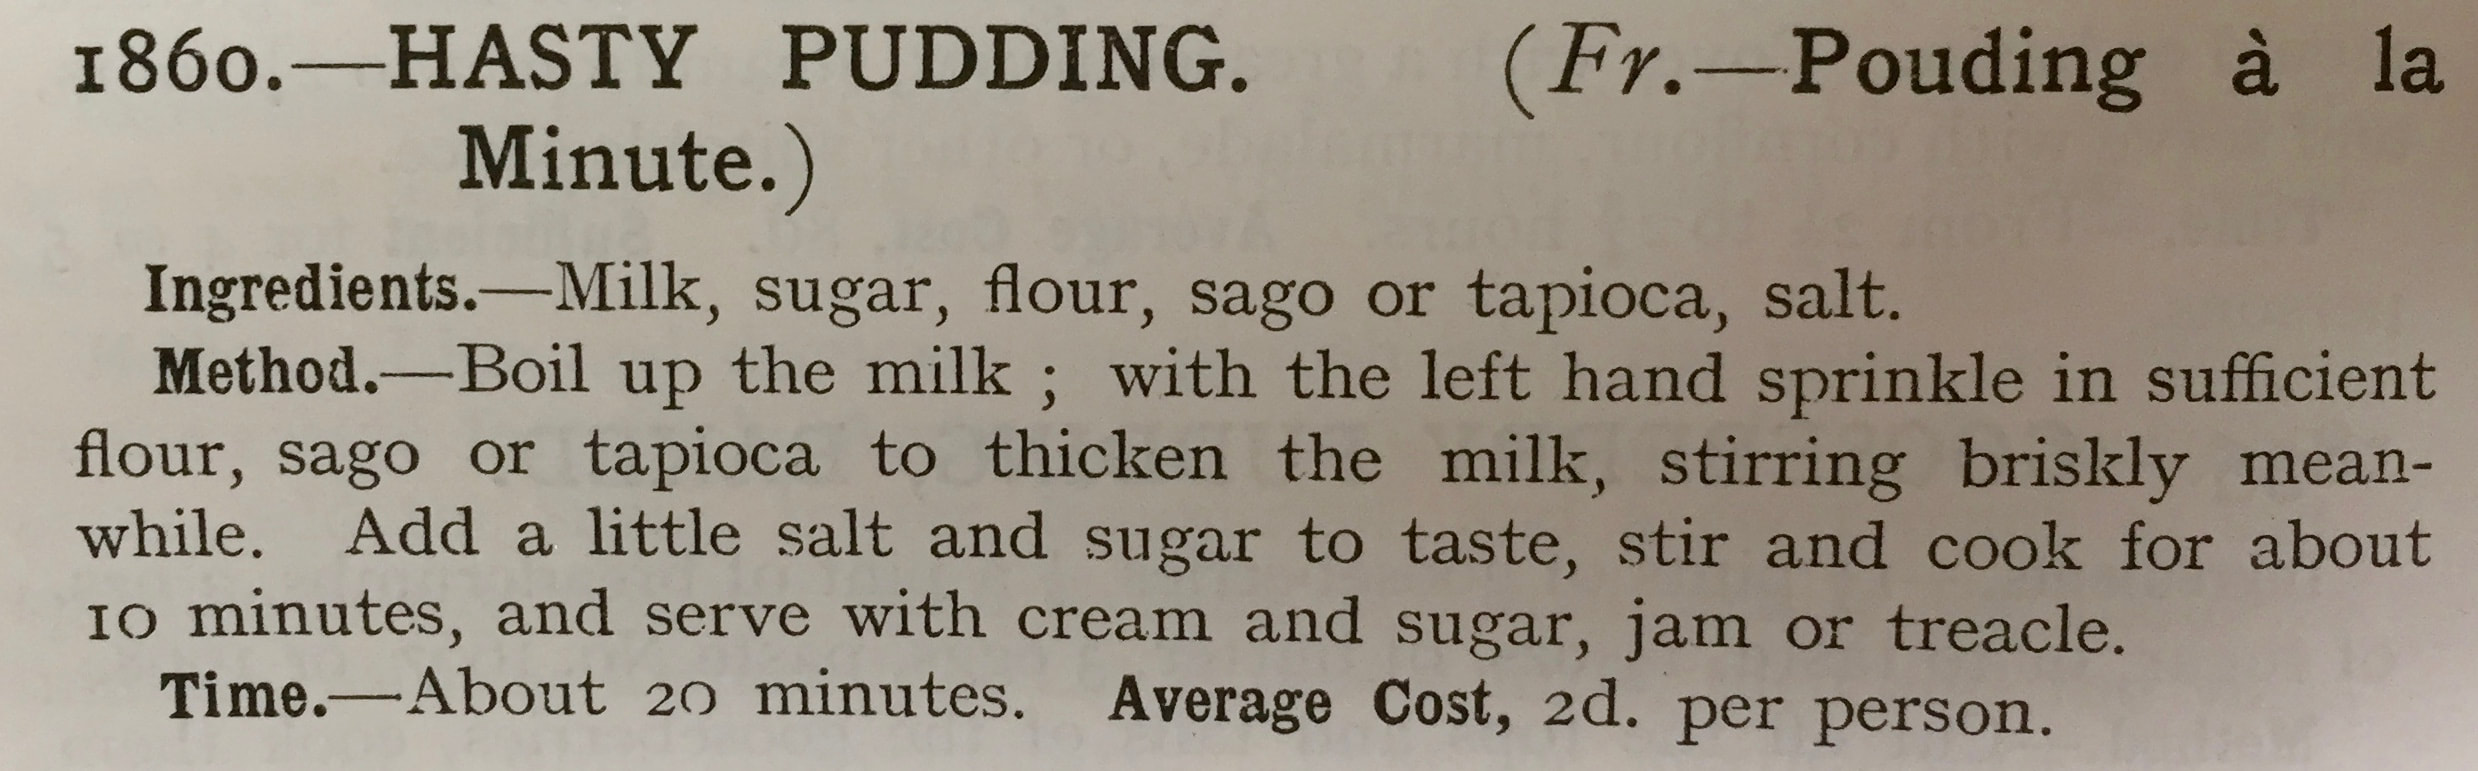 Miss Windsor: Mrs Beeton's Hasty Pudding recipe - from my 1906 edition of Mrs Beeton's Book of Household Management! 